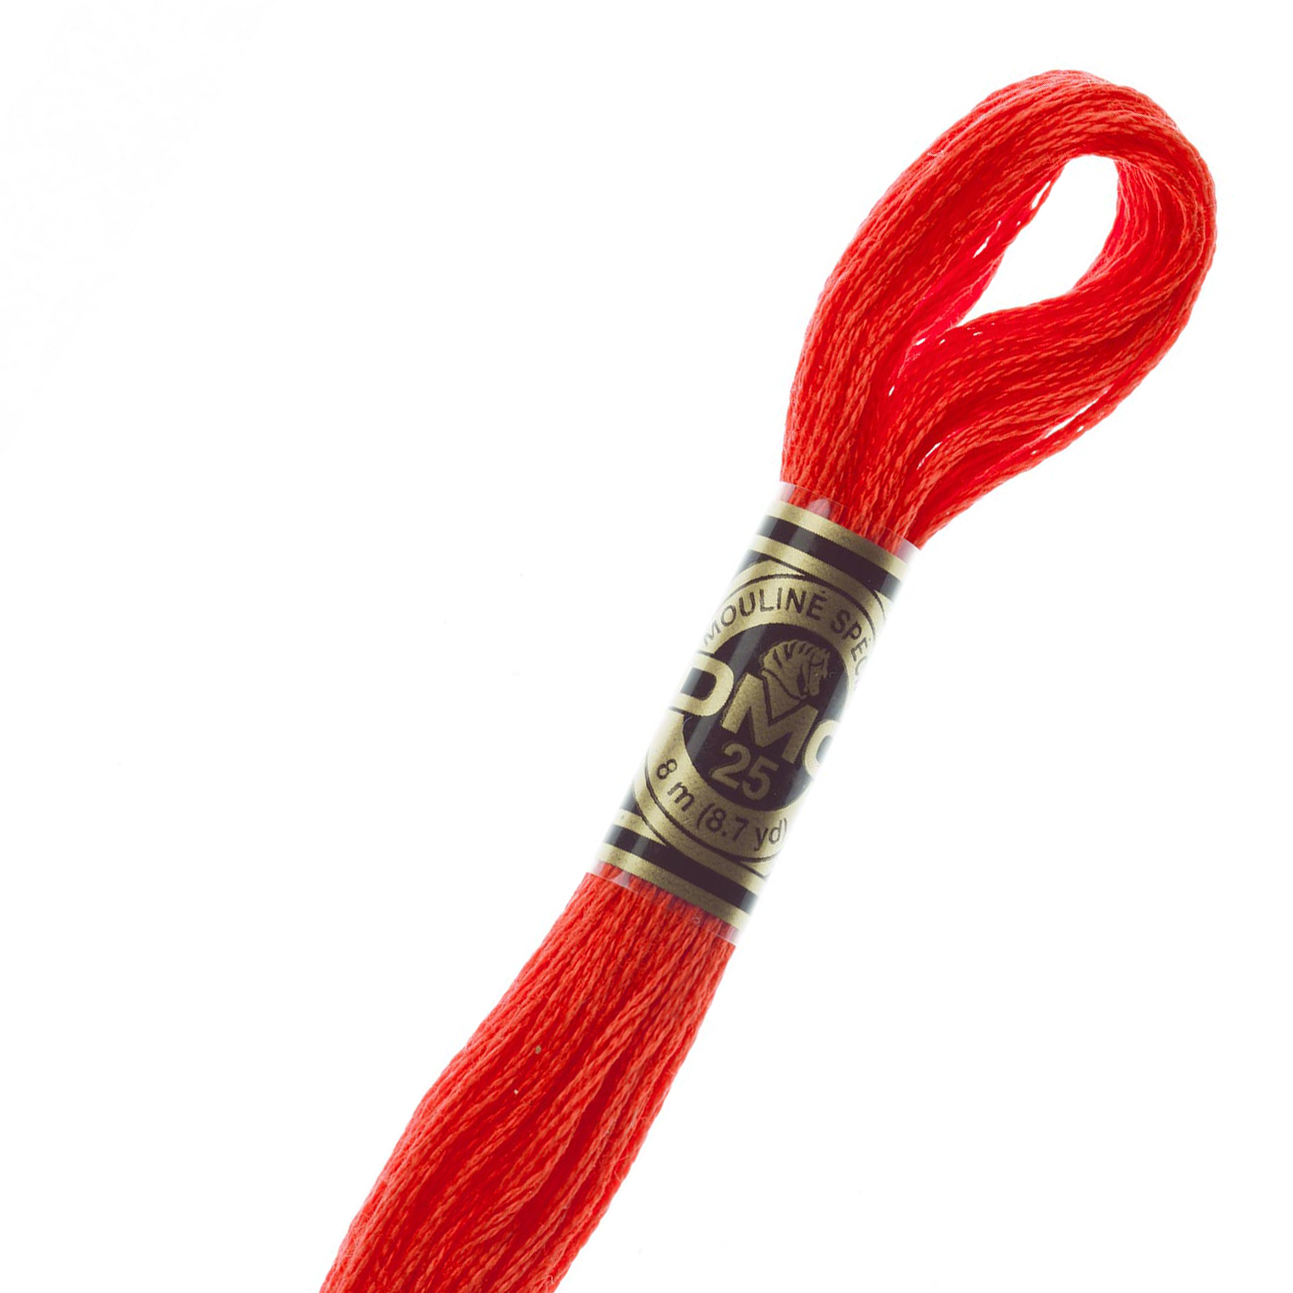 DMC 117AMZ3-666  3 Skein Pack Embroidery Floss, Bright Red